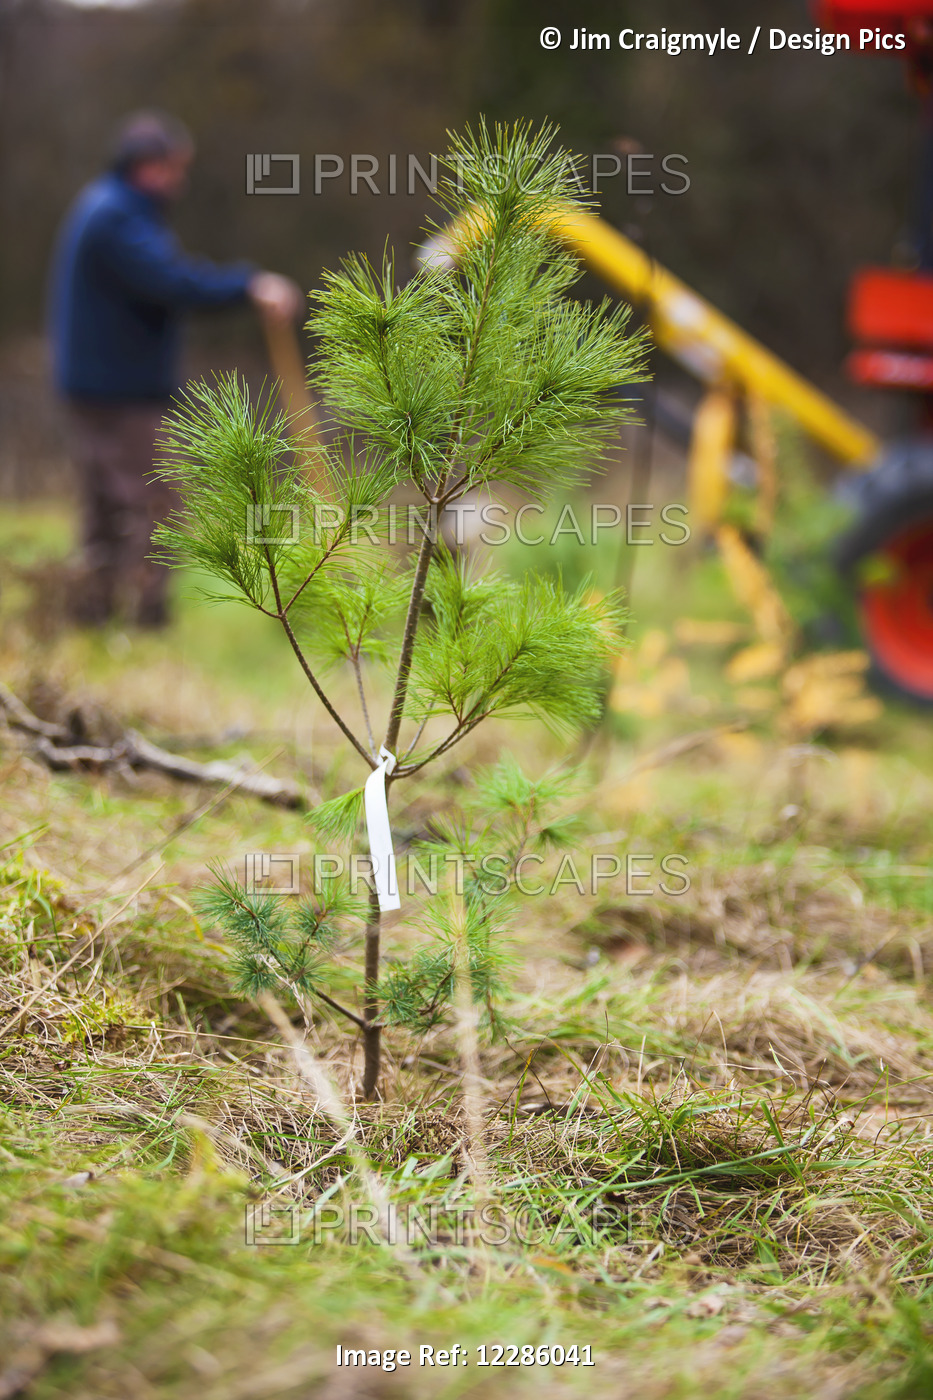 Planting White Pine And Other Trees And Shrubs Along Scanlon Creek; Bradford, ...